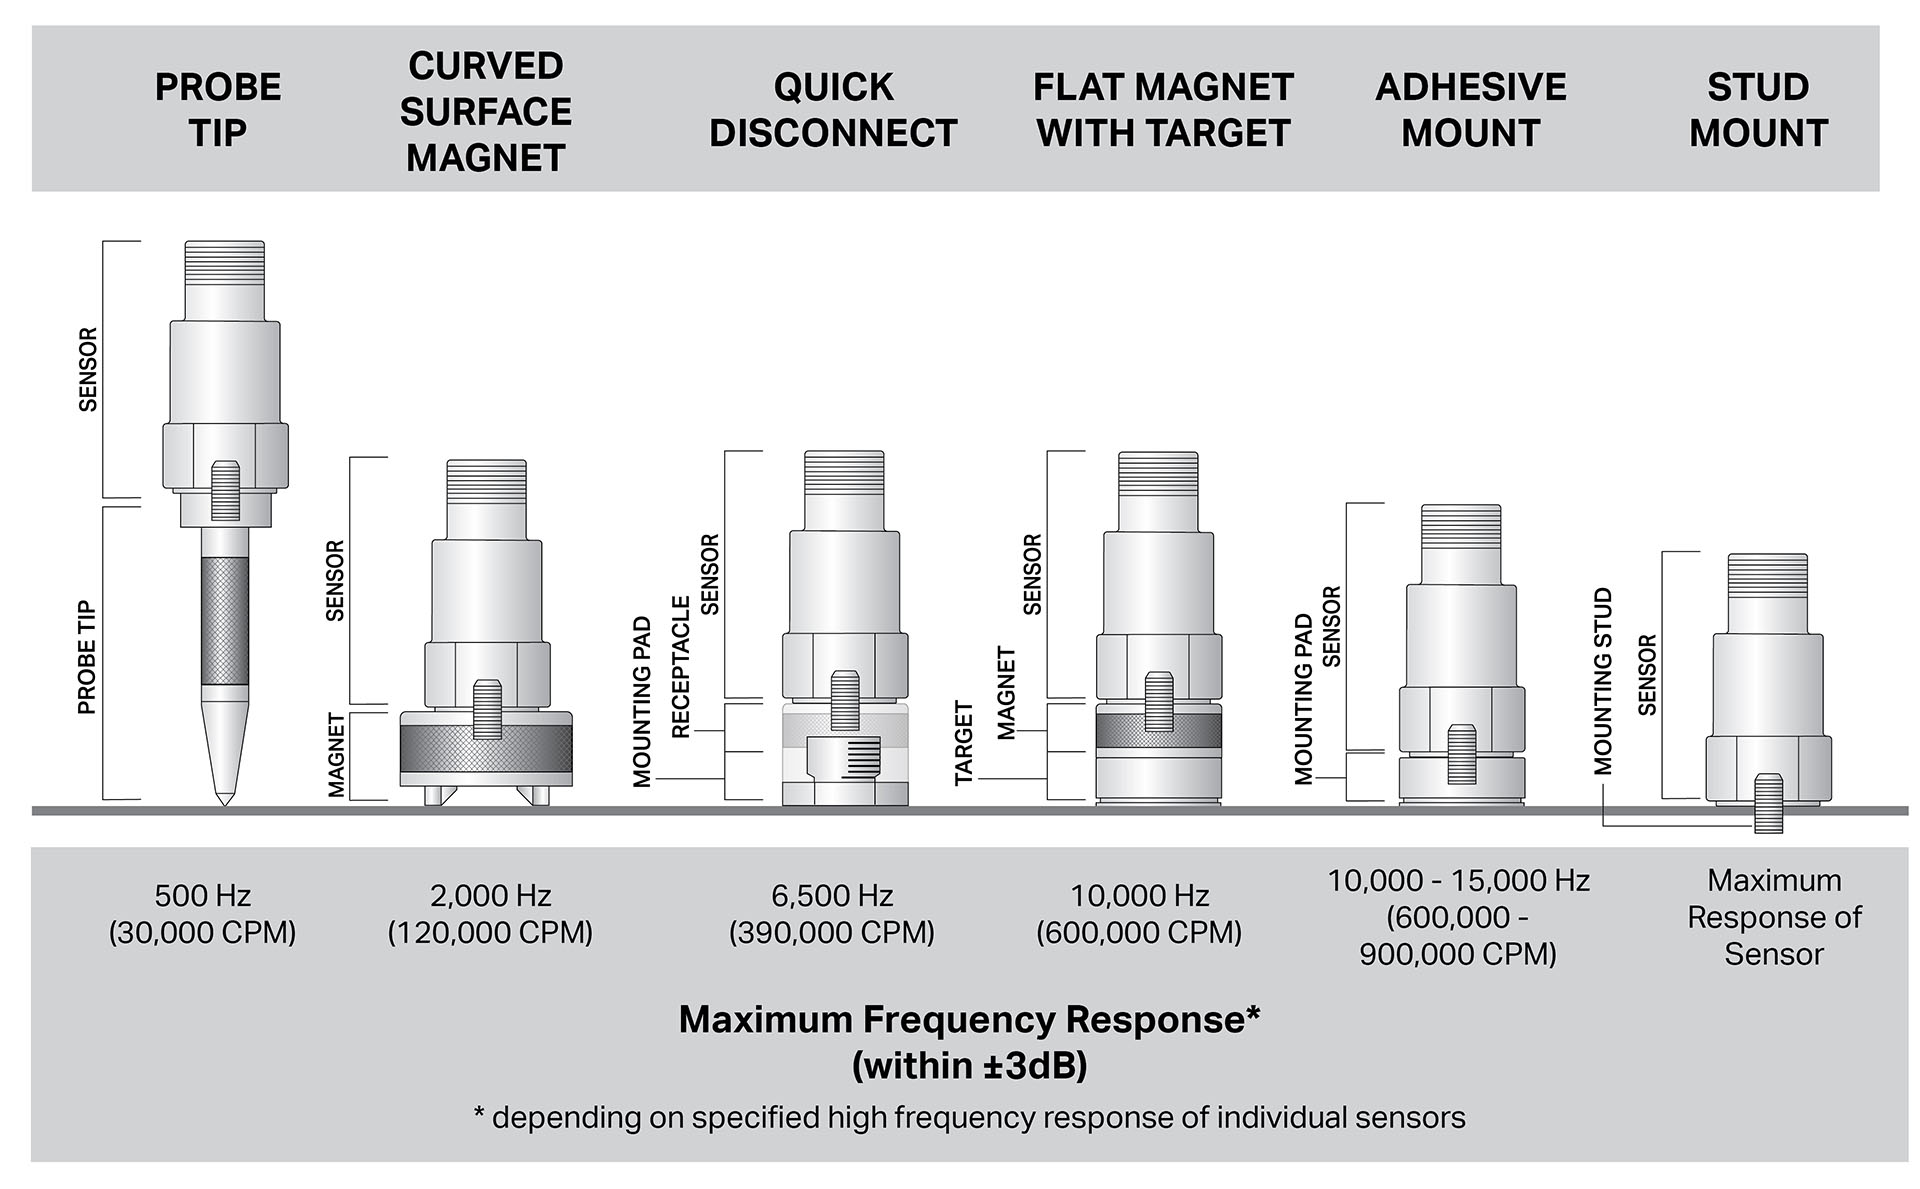 Diagram of CTC top exit accelerometers on various CTC accelerometer mounting hardware bases, including a probe tip, curved surface magnet, quick disconnect, flat magnet with target, adhesive mount, and stud mount.